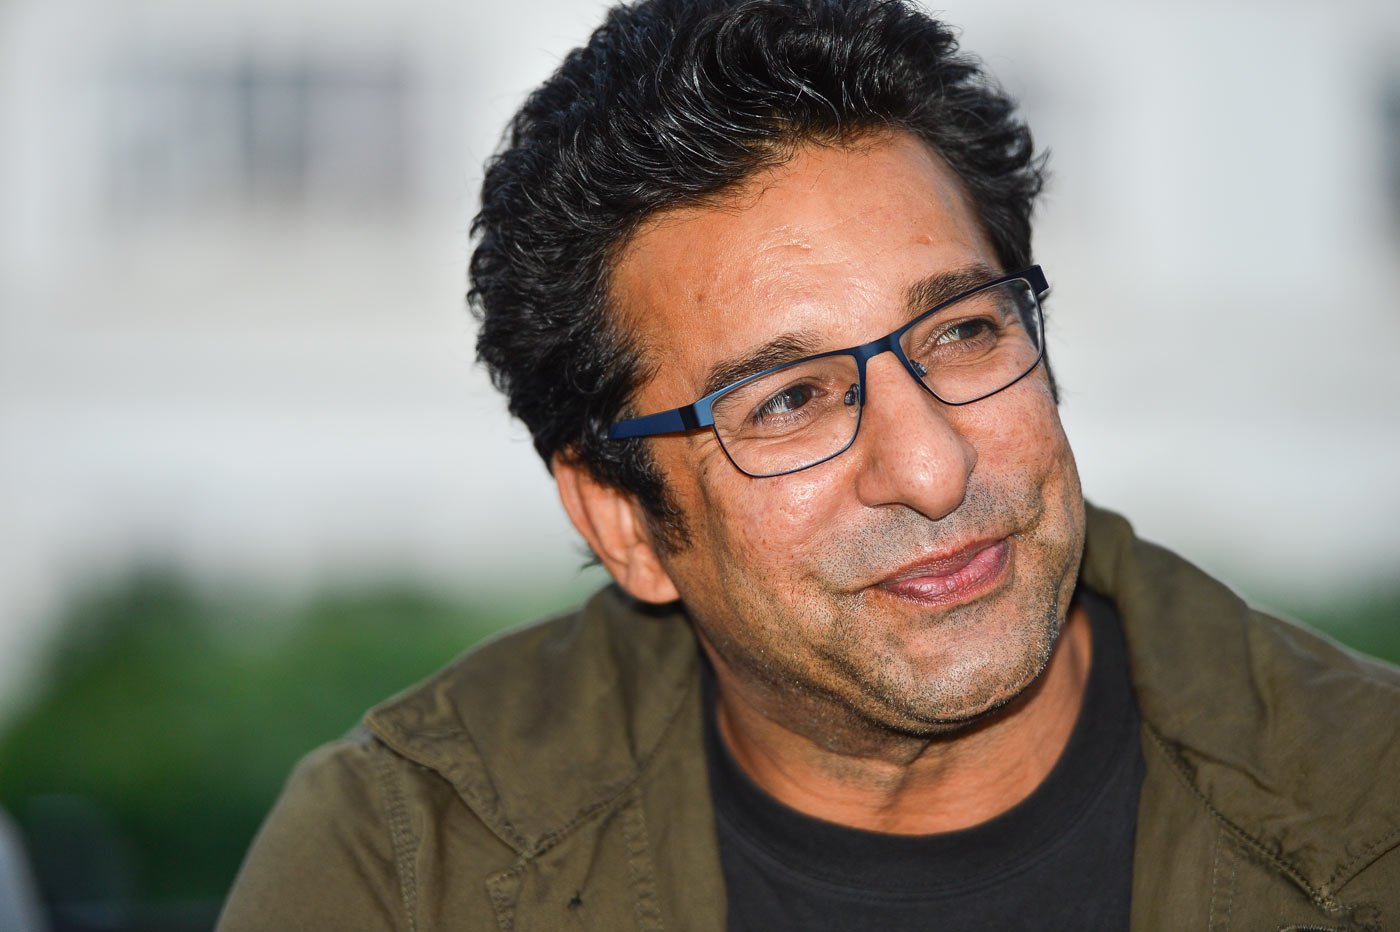 wasim akram finds himself in trouble with the law photo courtesy cricinfo